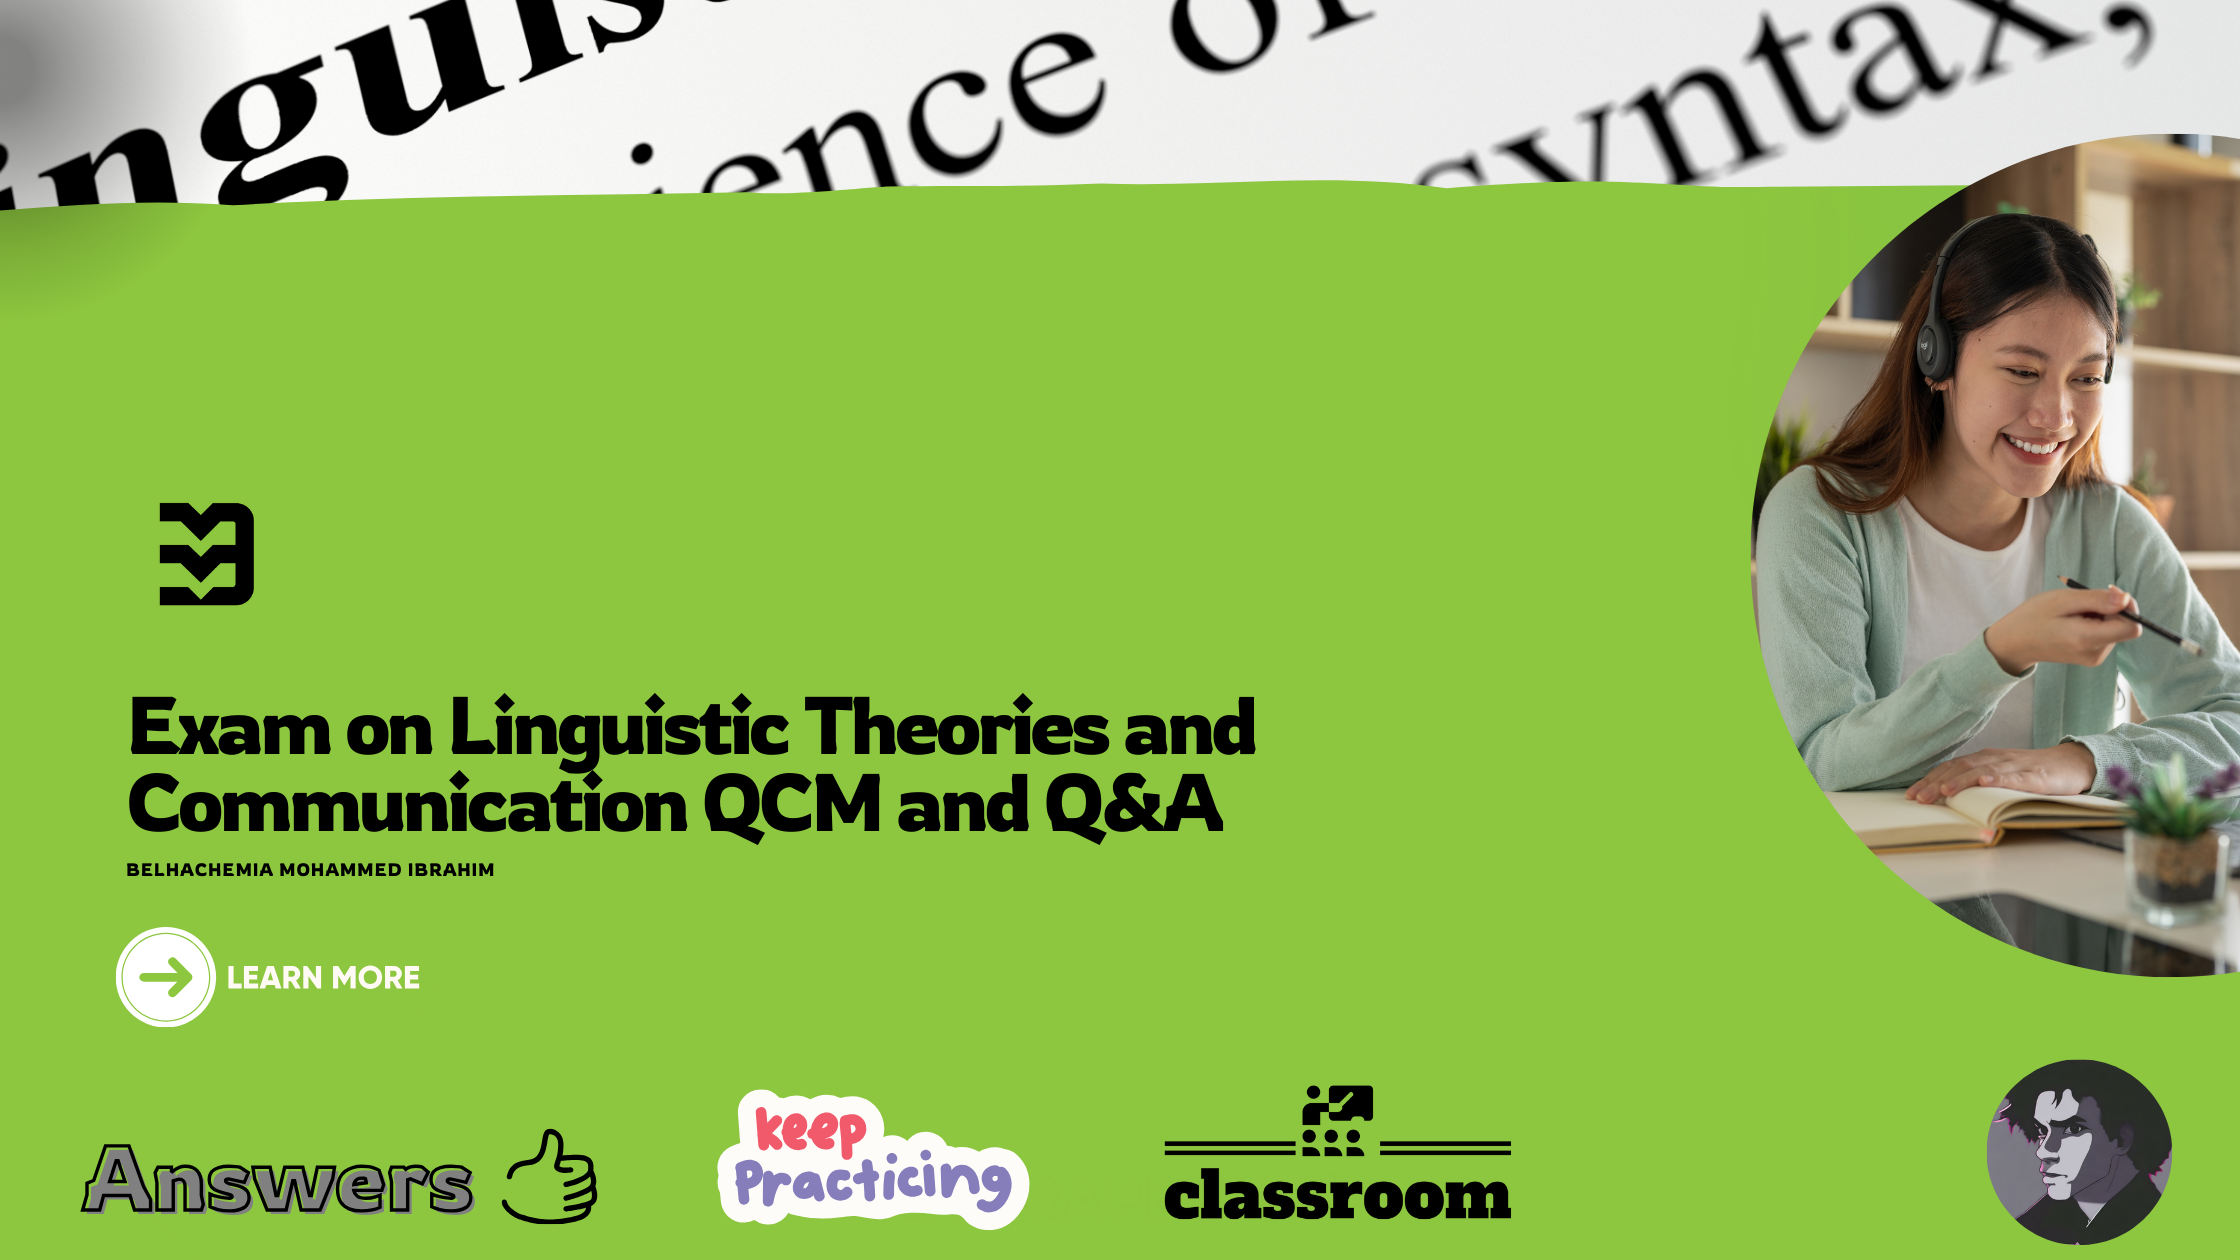 Exam on Linguistic Theories and Communication QCM and Q&A